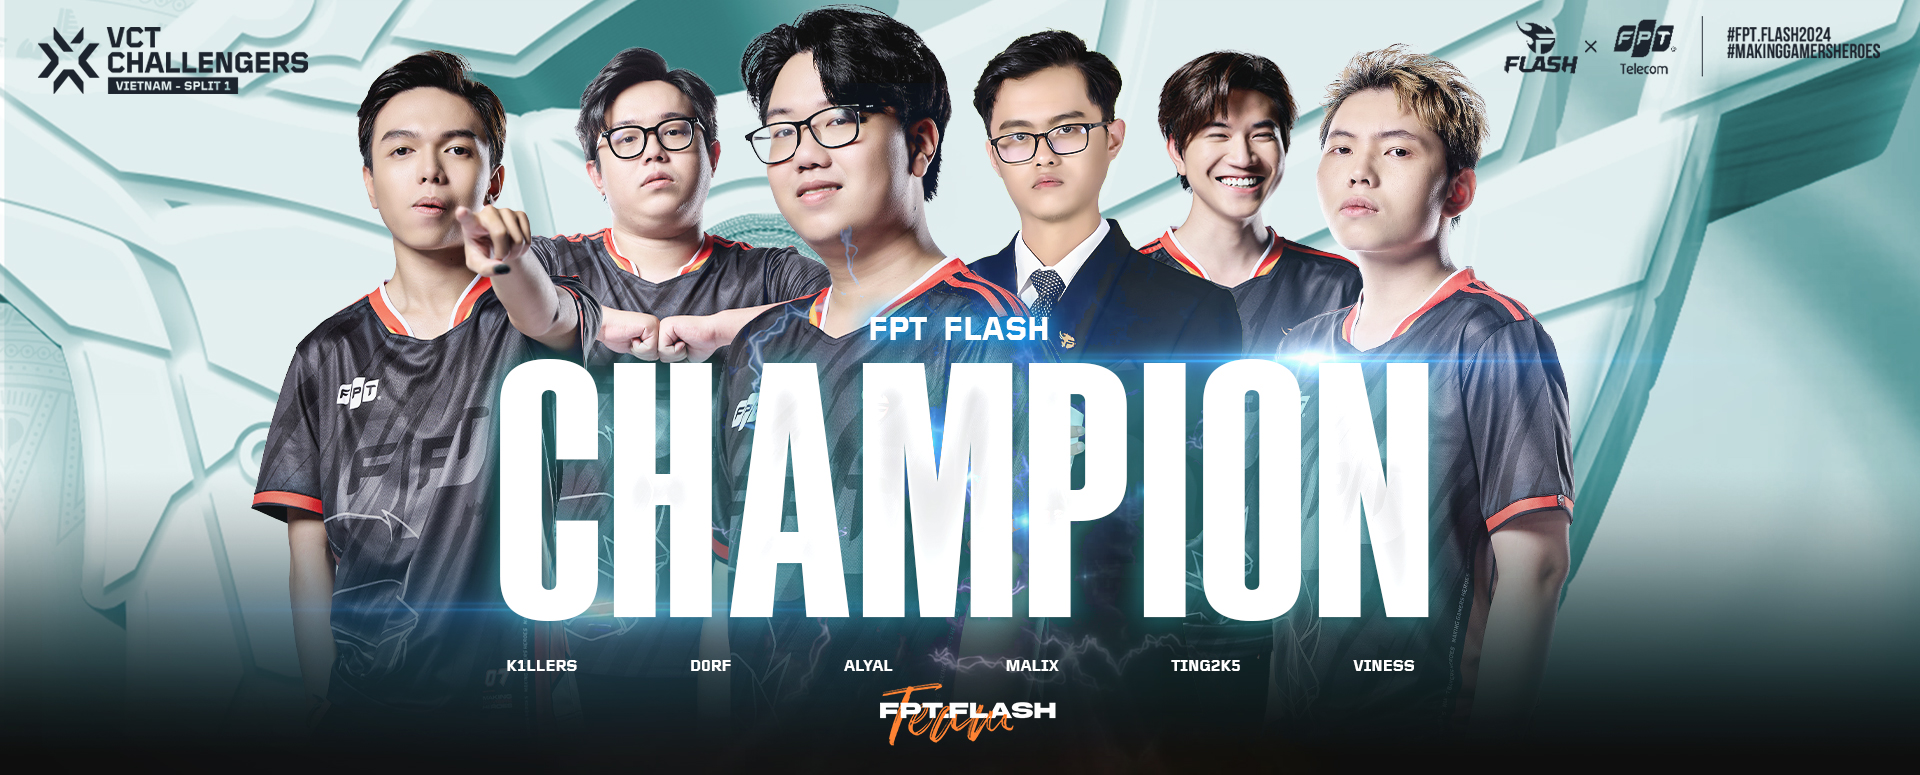 FPT FLASH - THE NEW KING OF VALORANT VIETNAM